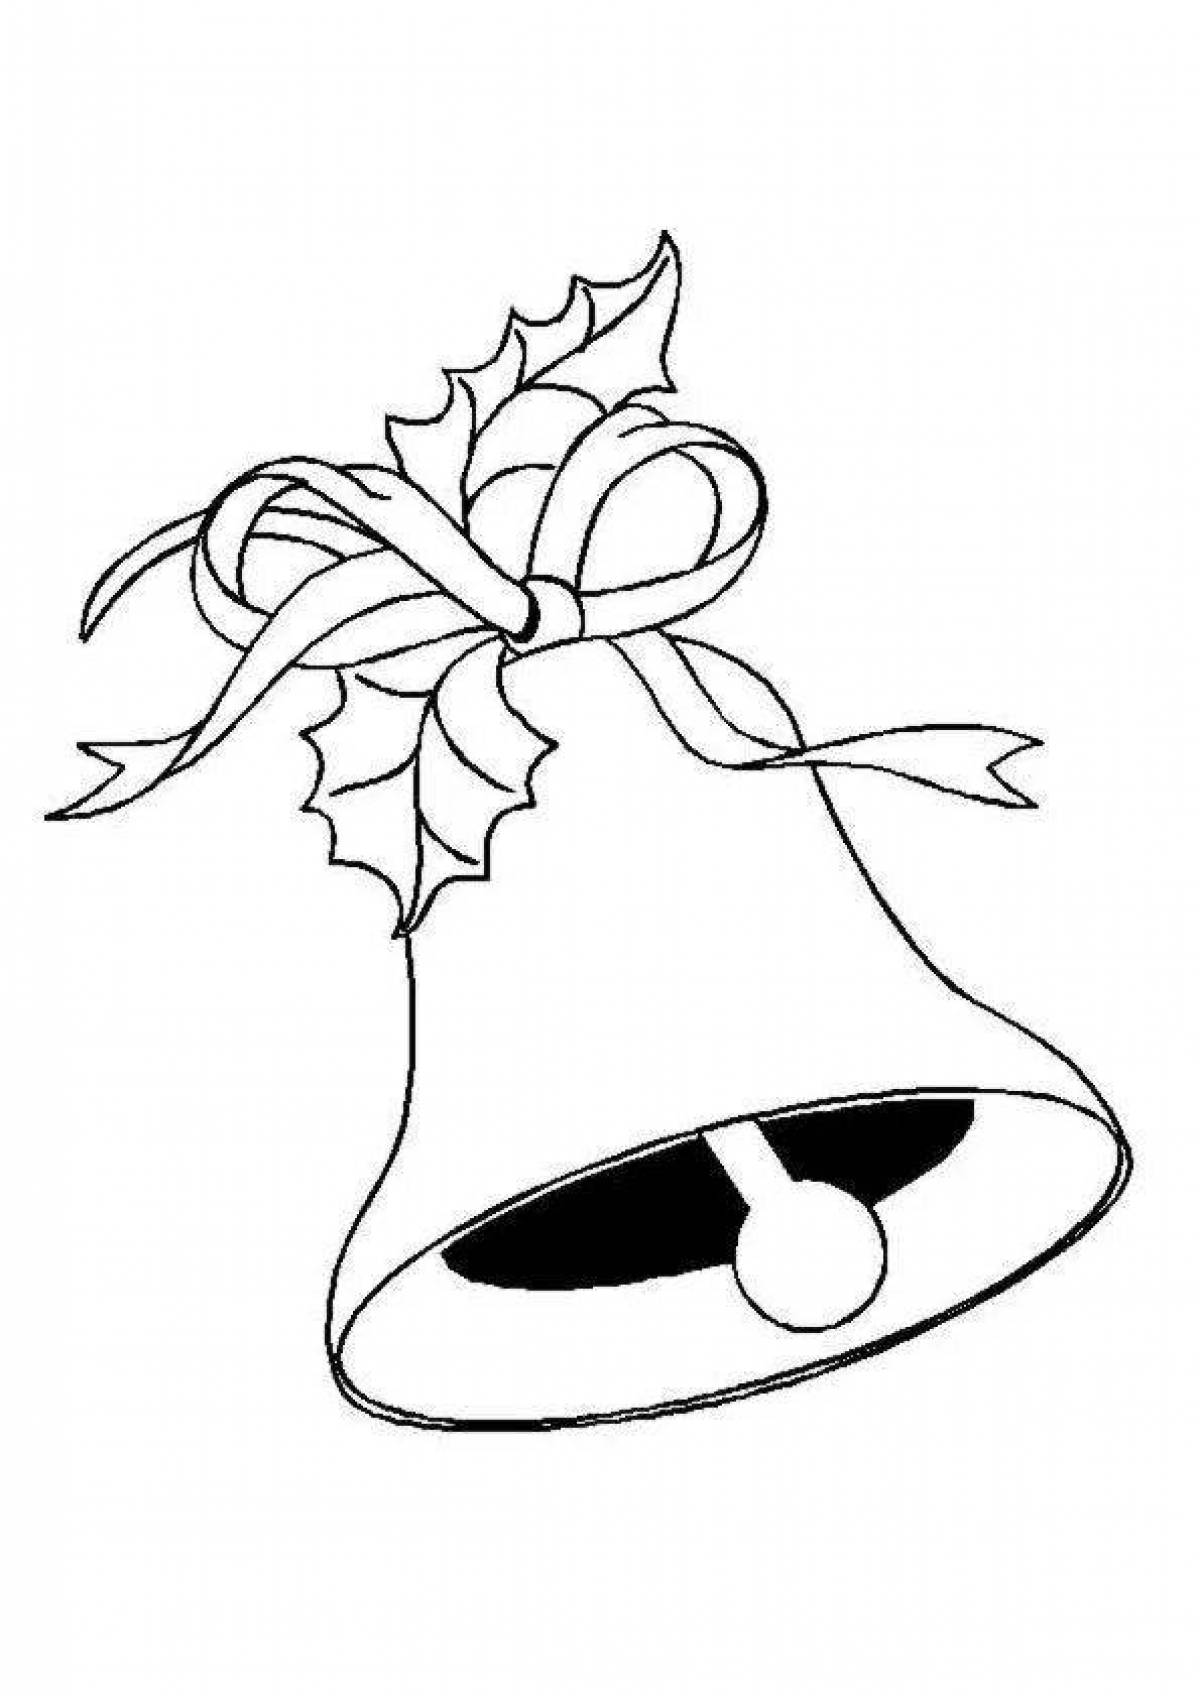 Coloring page for a fascinating school bell